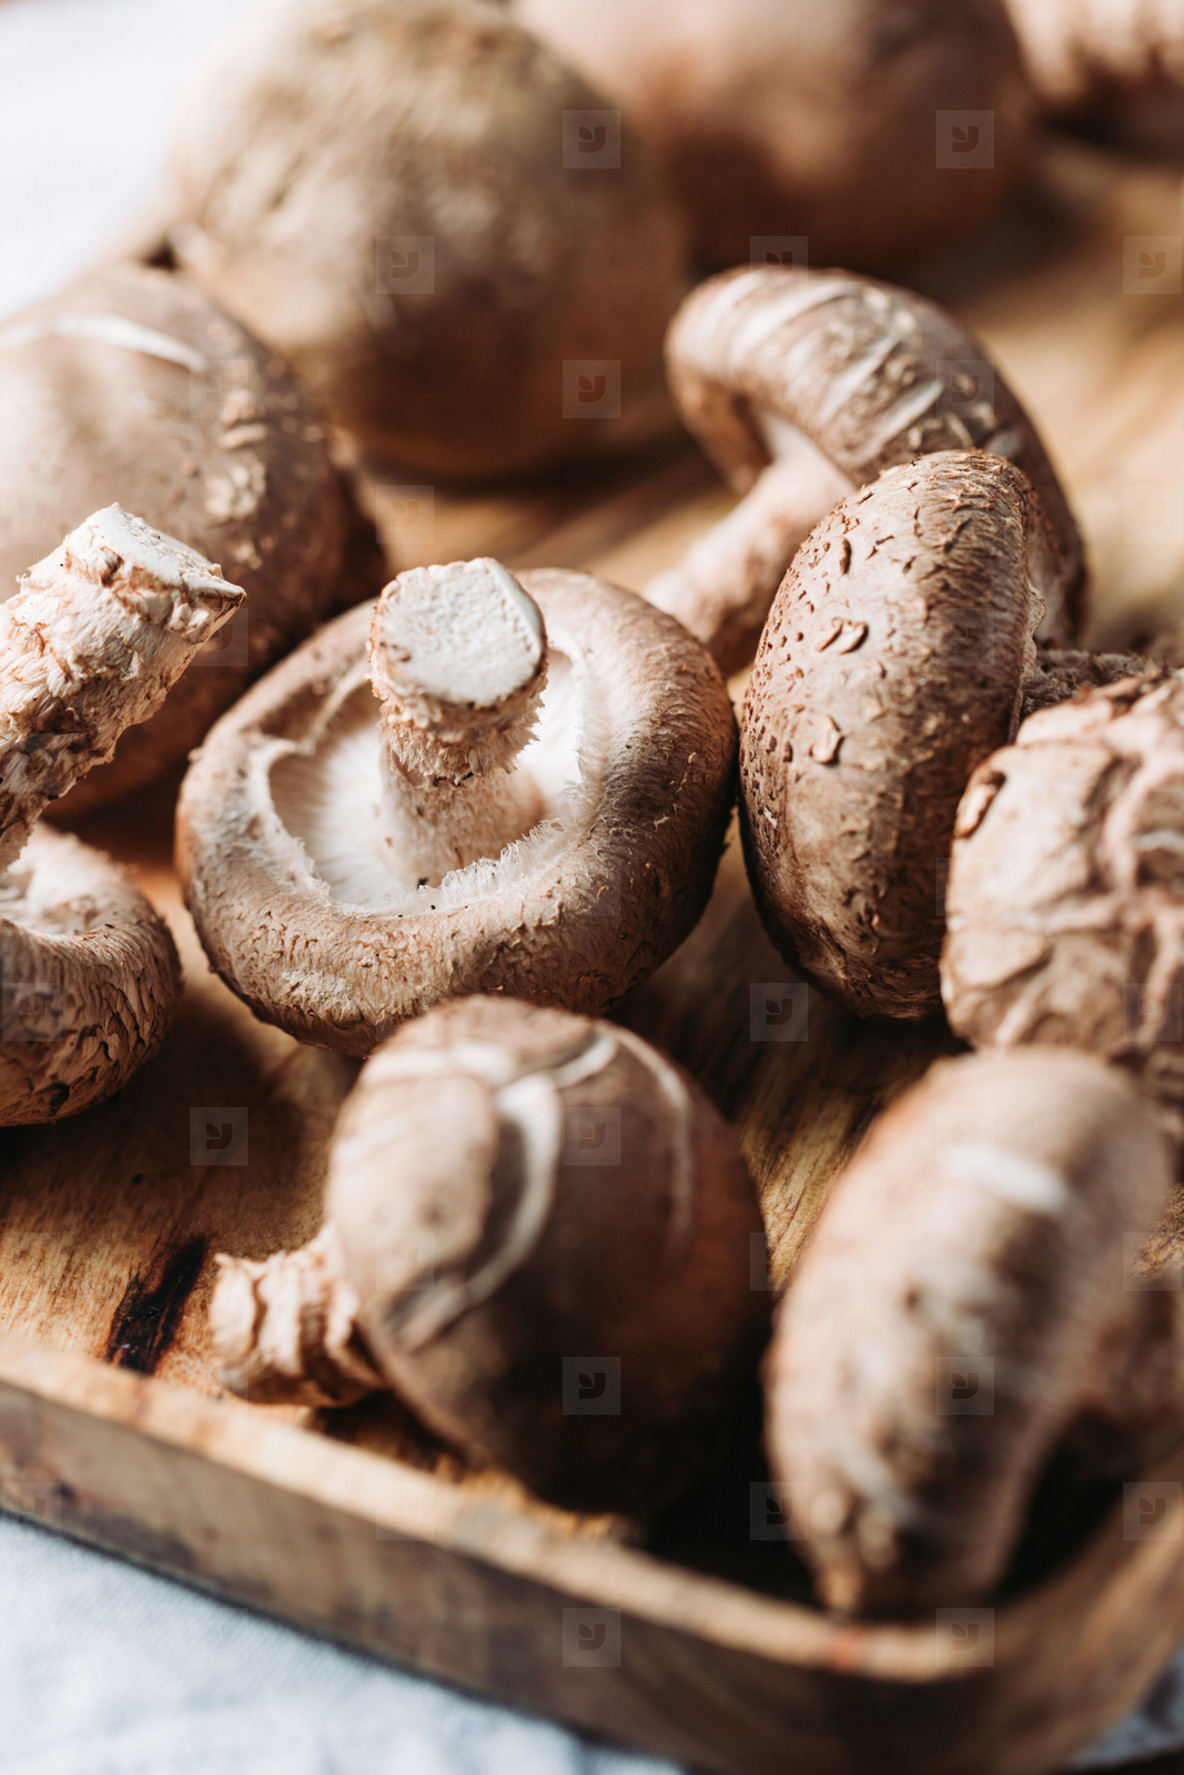 Shiitake mushrooms in a wooden bowl on a table  Macro food photography